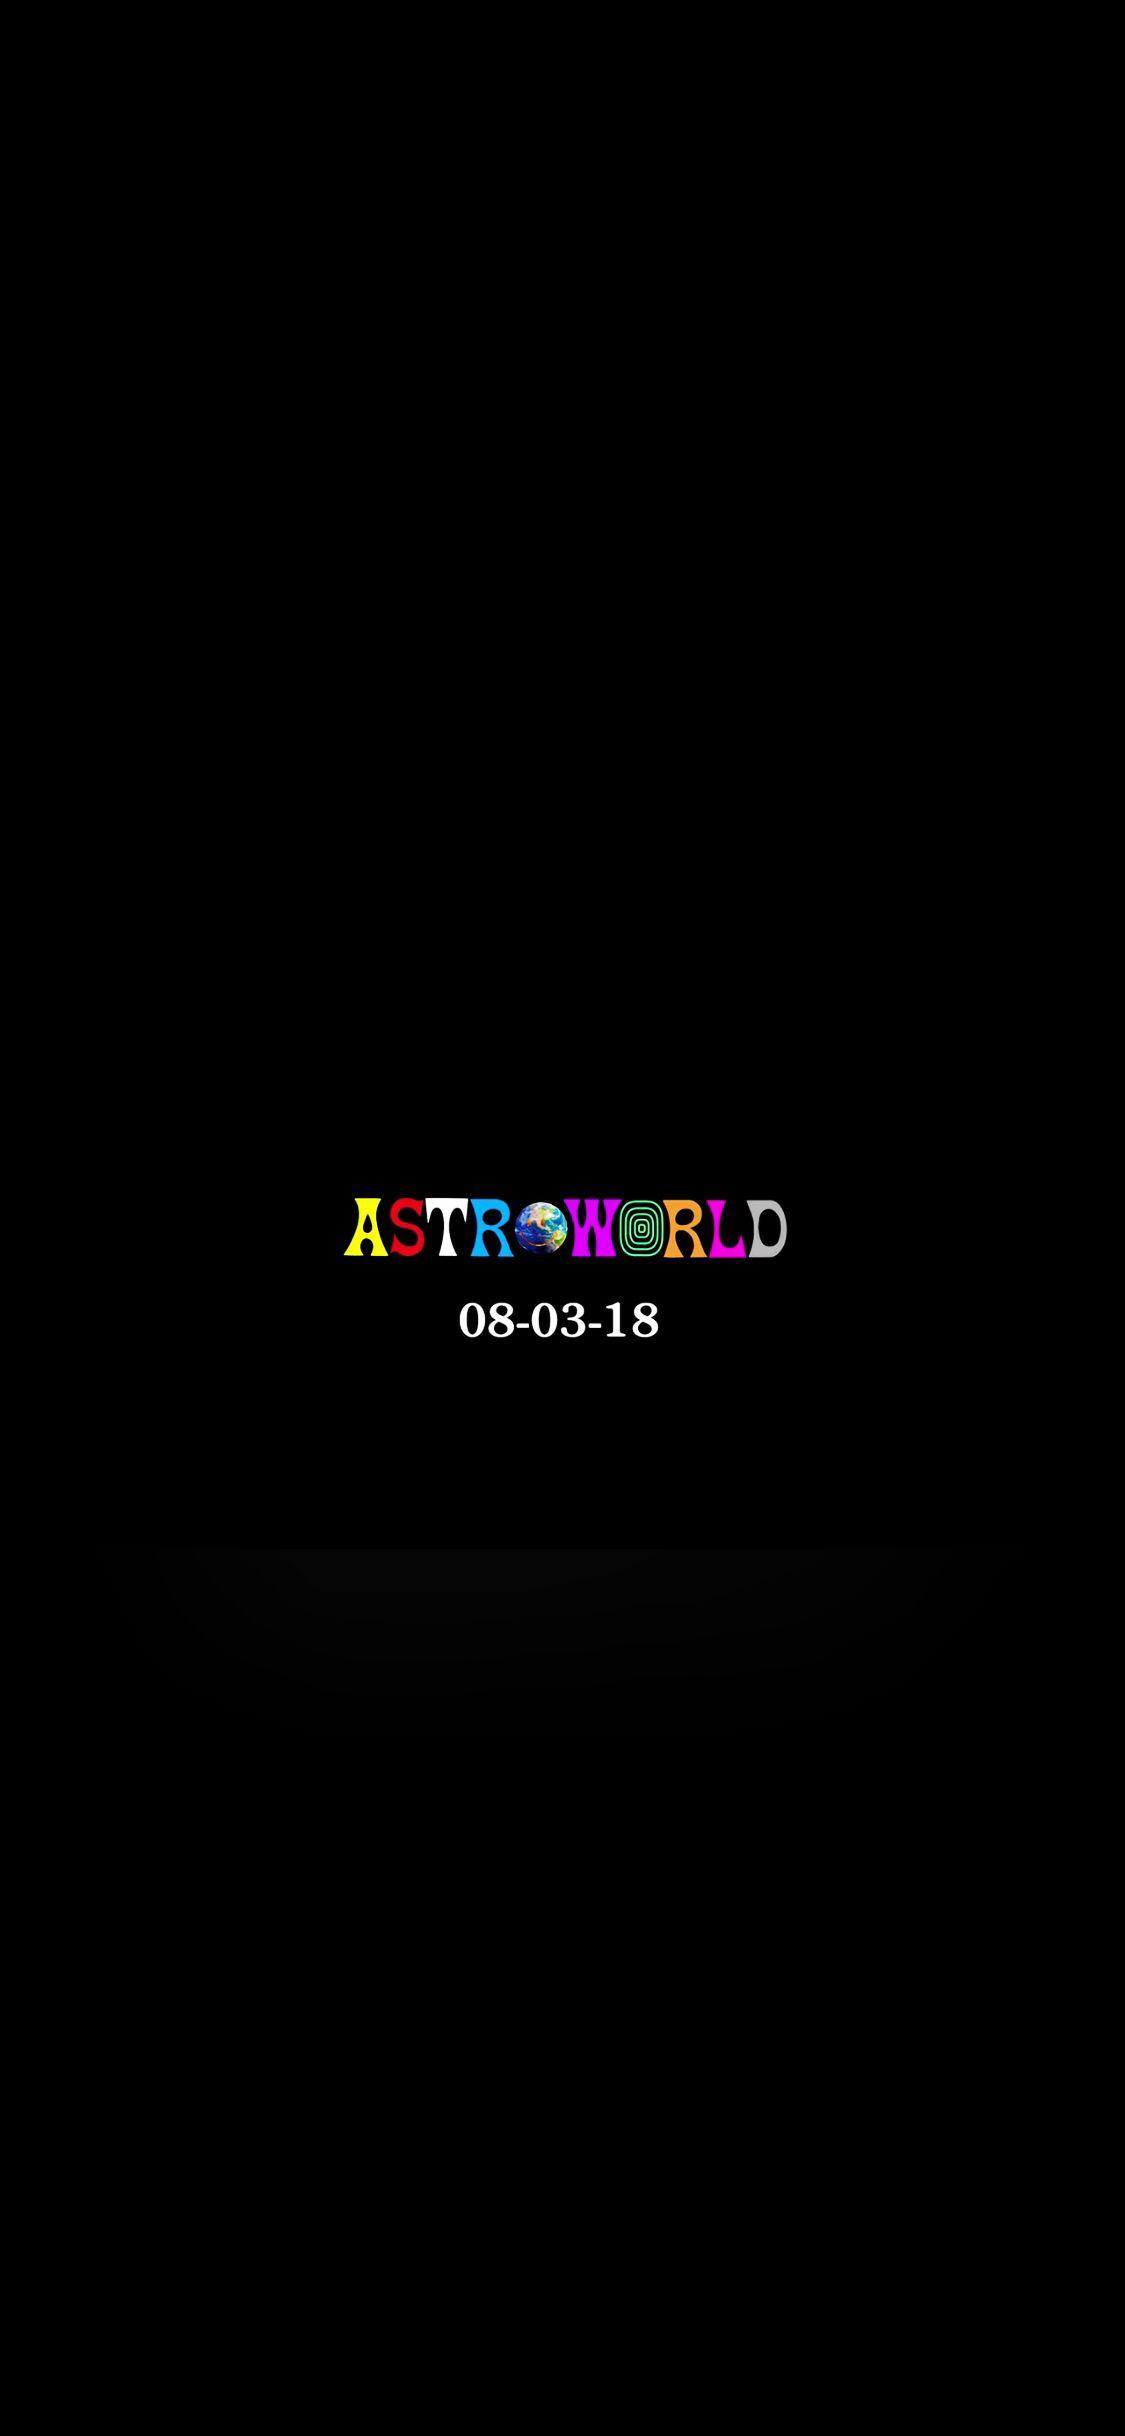 Astroworld Logo - Astroworld Wallpaper from Apple Music trailer (iPhone X)